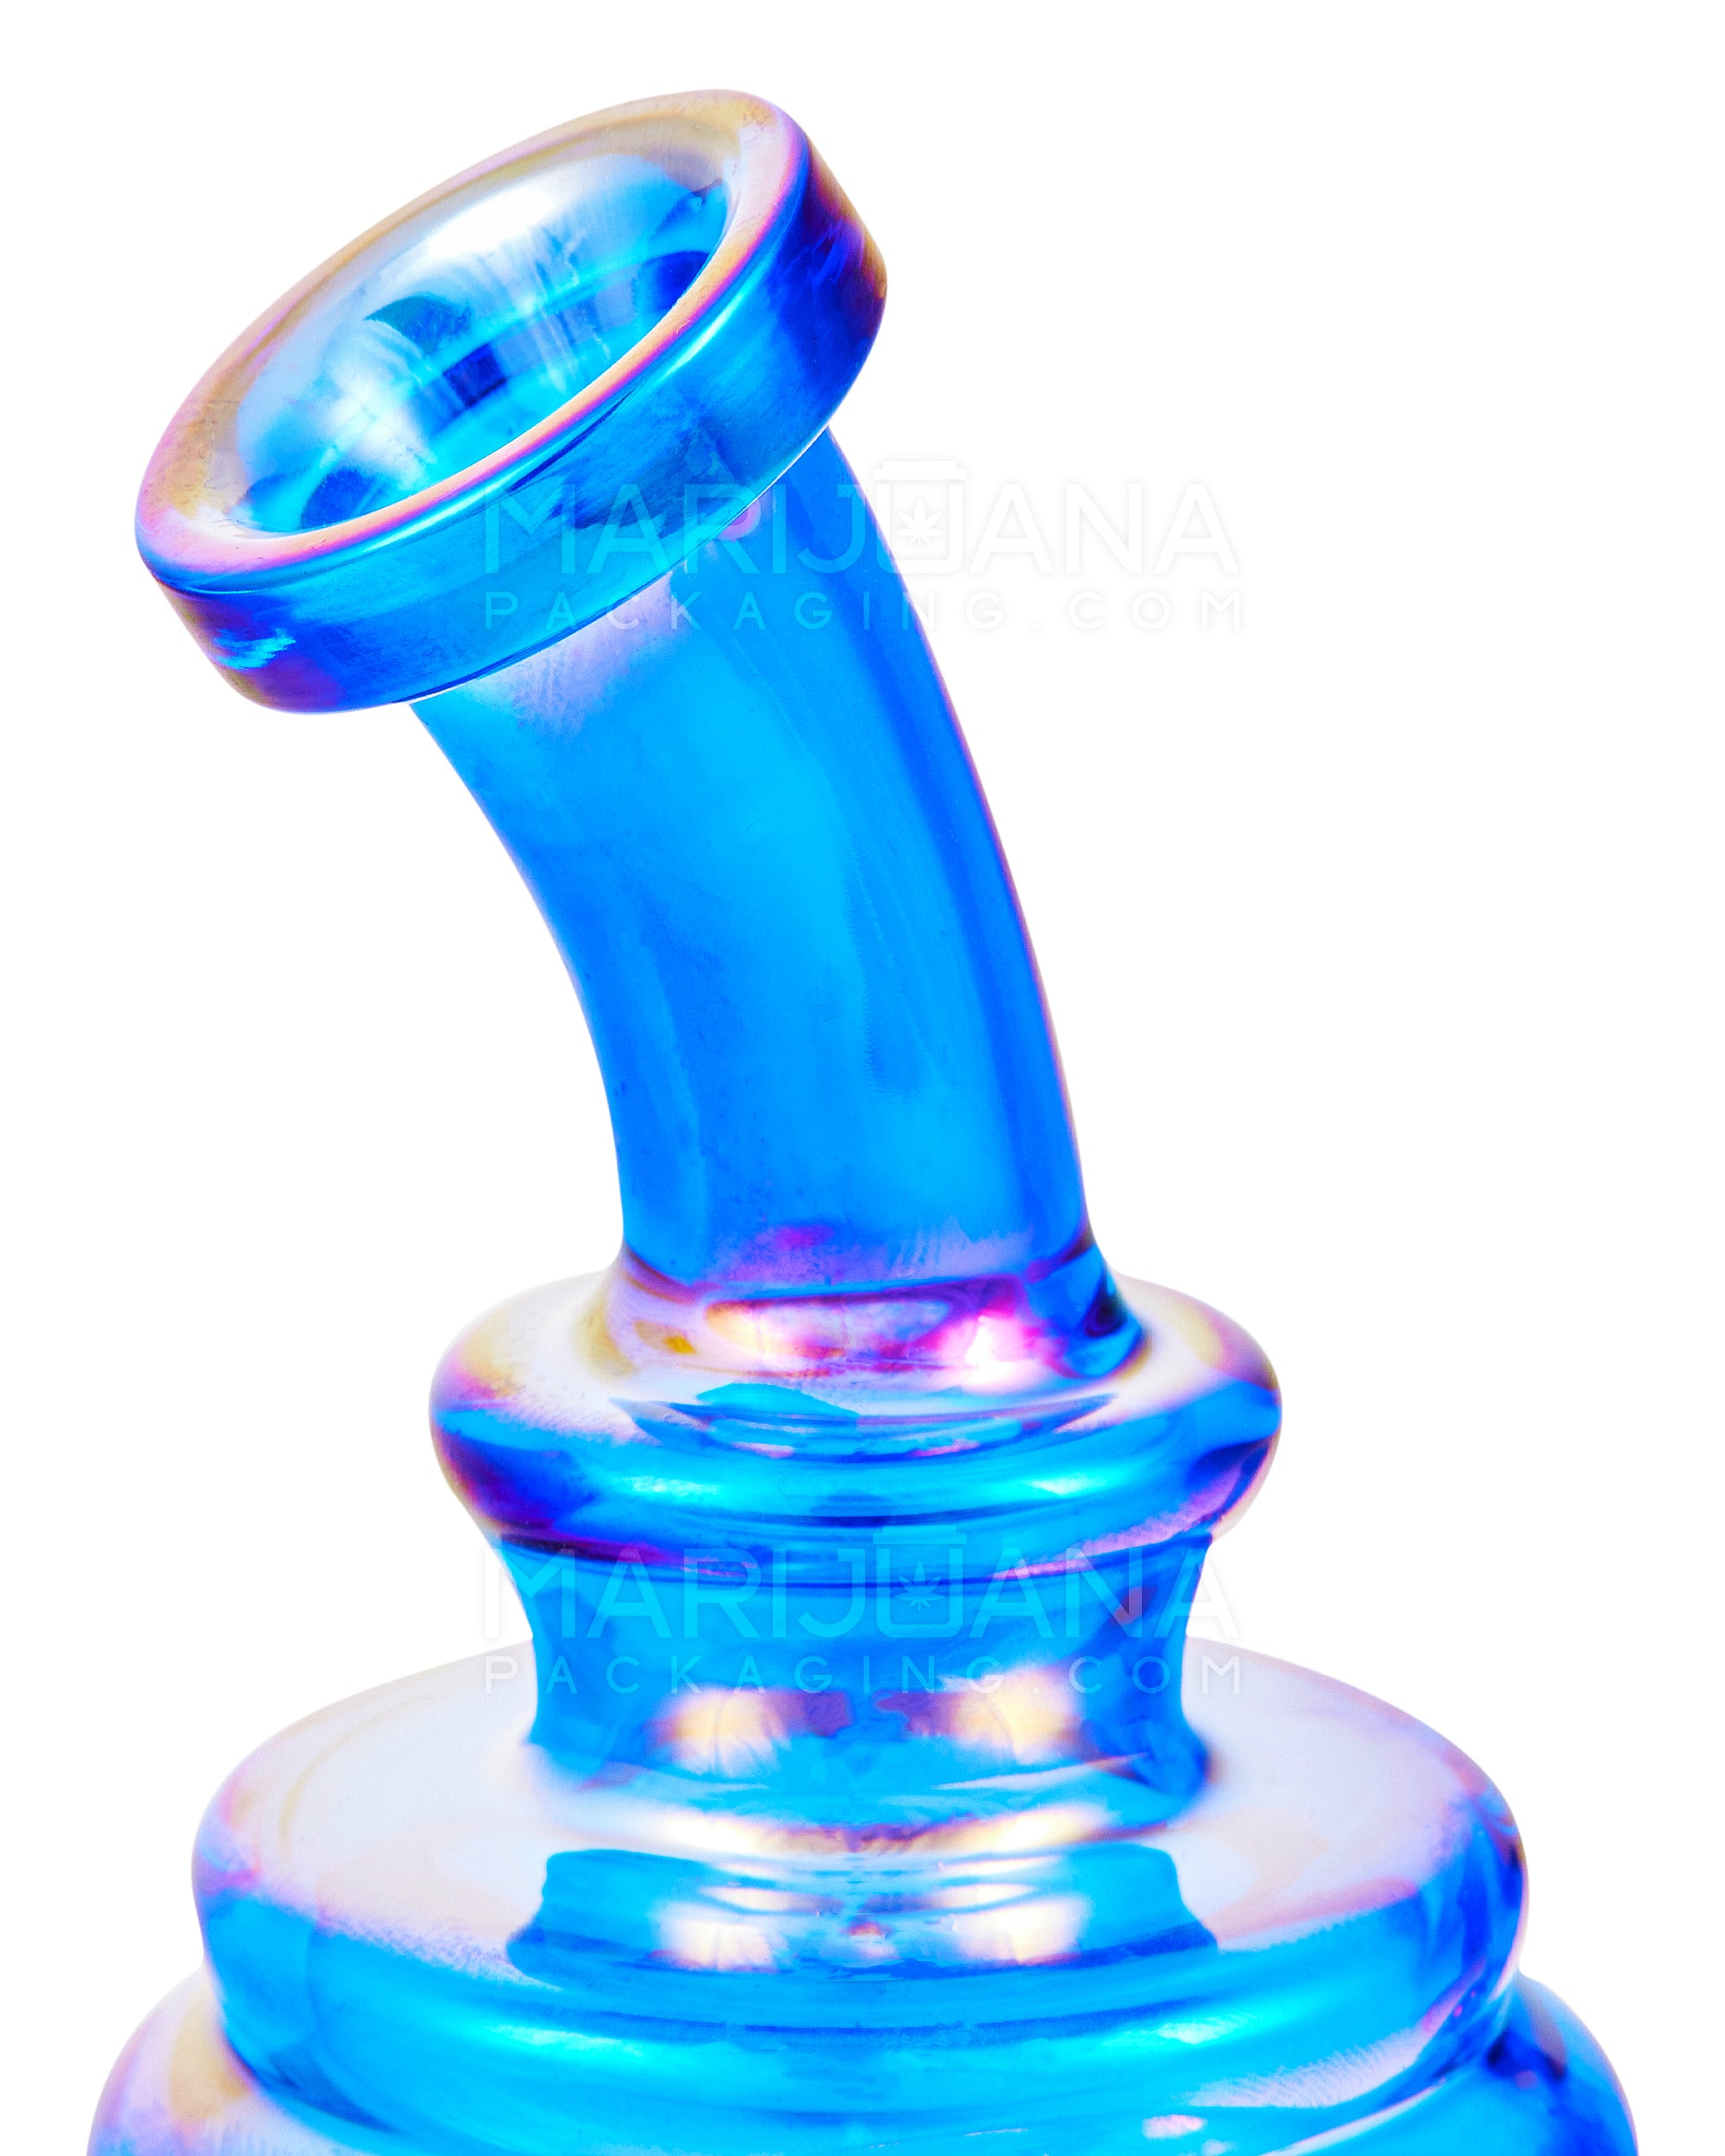 Bent Neck Iridescent Recycler Glass Dab Rig w/ Silicone Claim Catcher | 7in Tall - 14mm Banger - Blue - 6